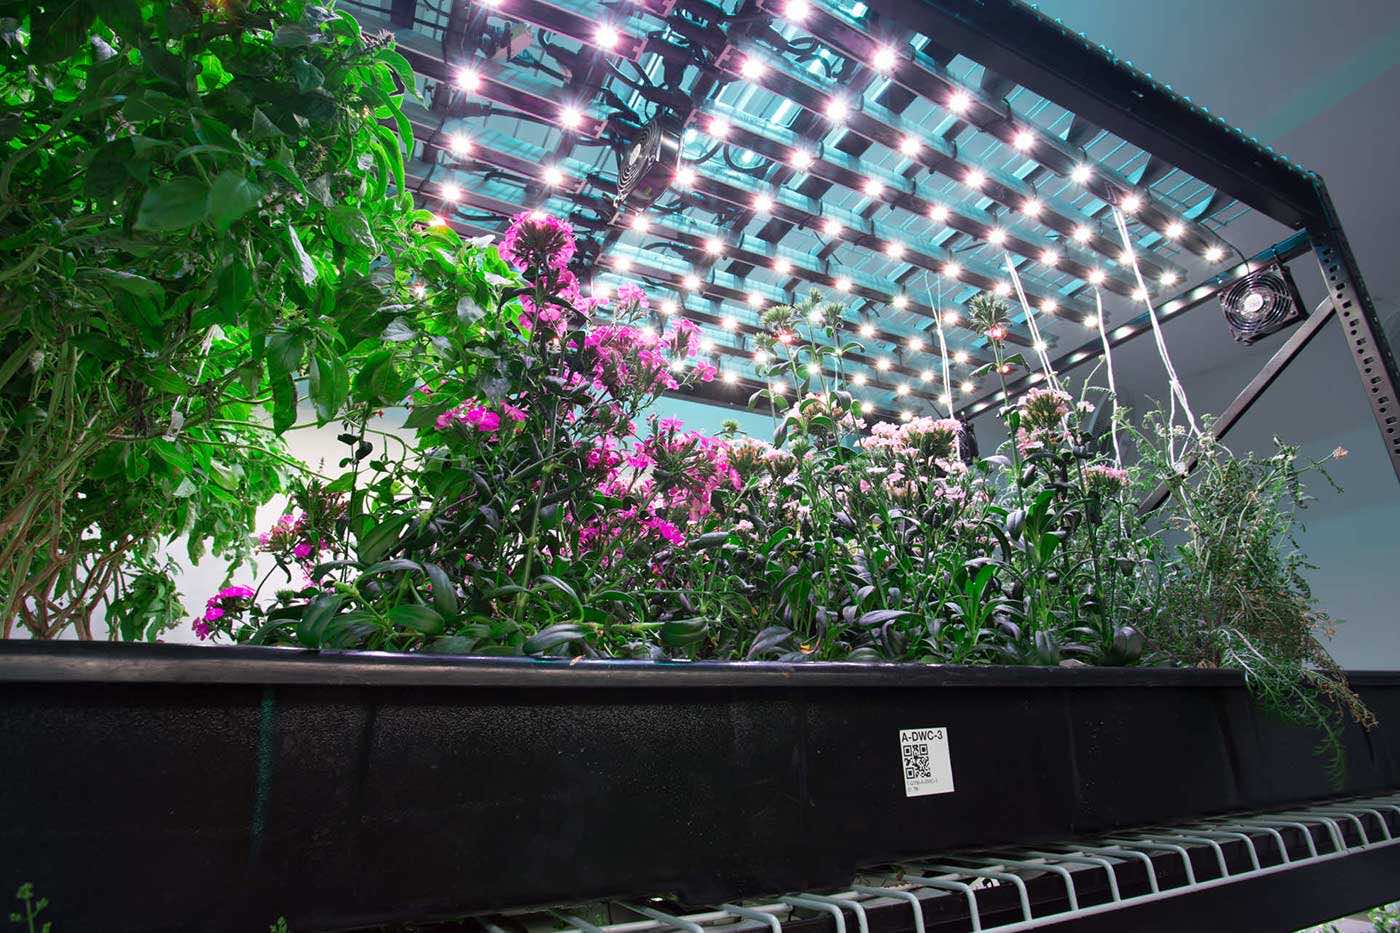 plants and flowers on vertical shelving system with grow lights above